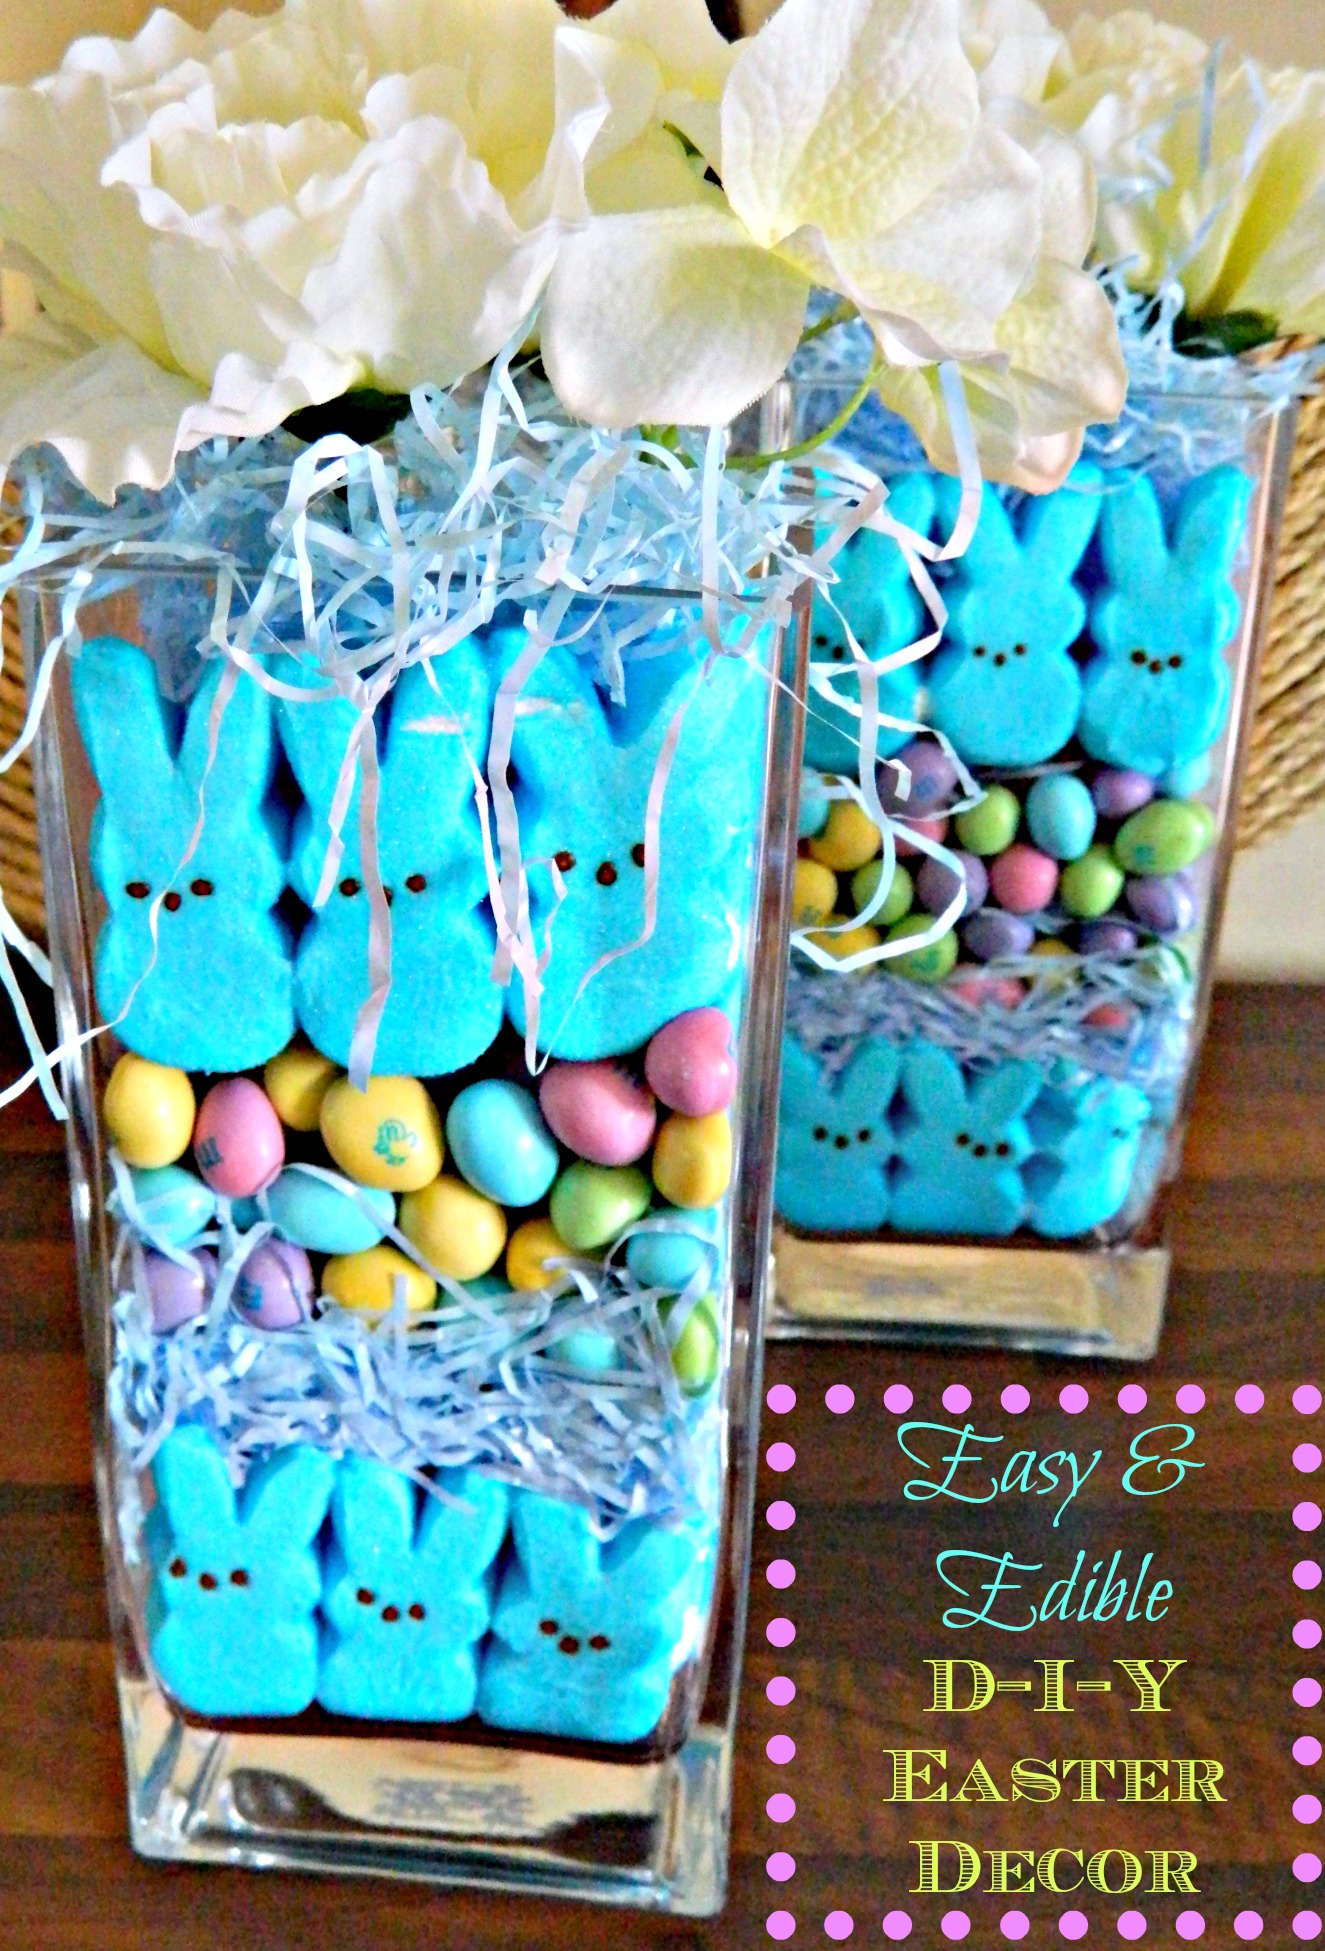 Edible-Easter-decorations.-So-cute.